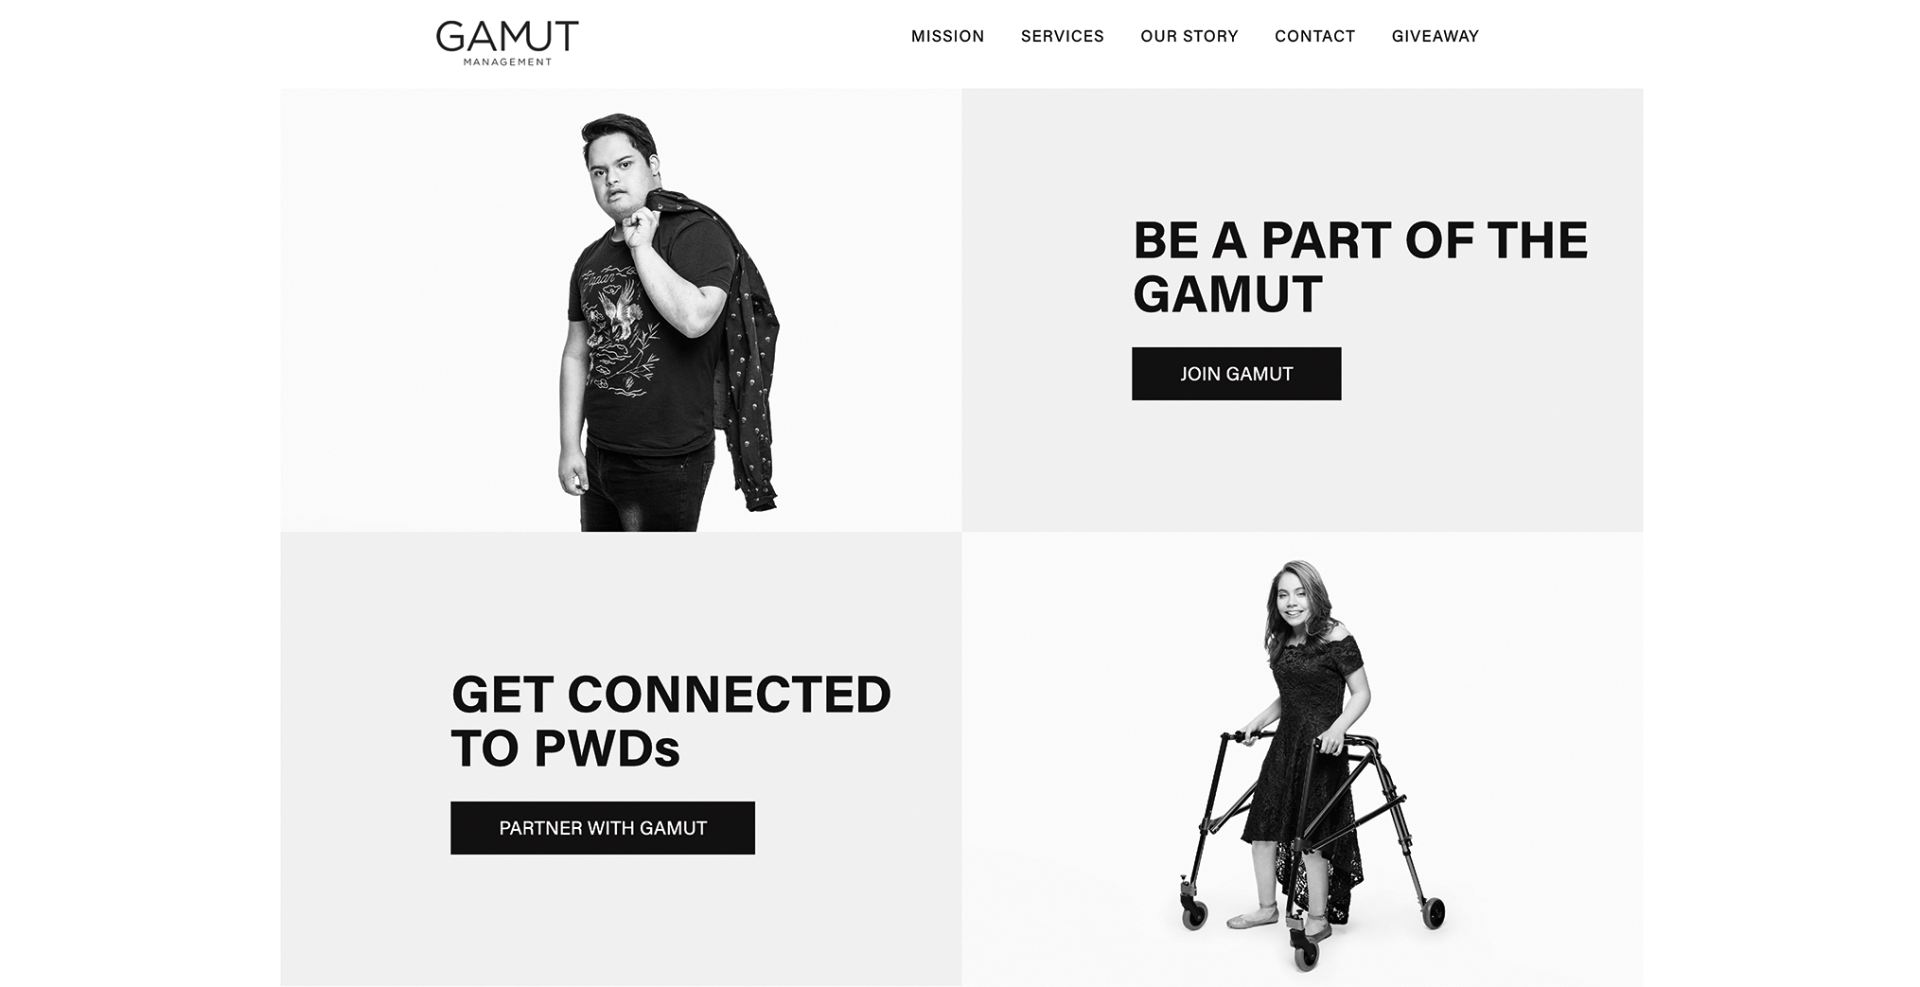 Images from Gamut Management with wording Get Connected to PWDs (Partner with Gaumut) and Be a part of the Gamut (Join Gamut)